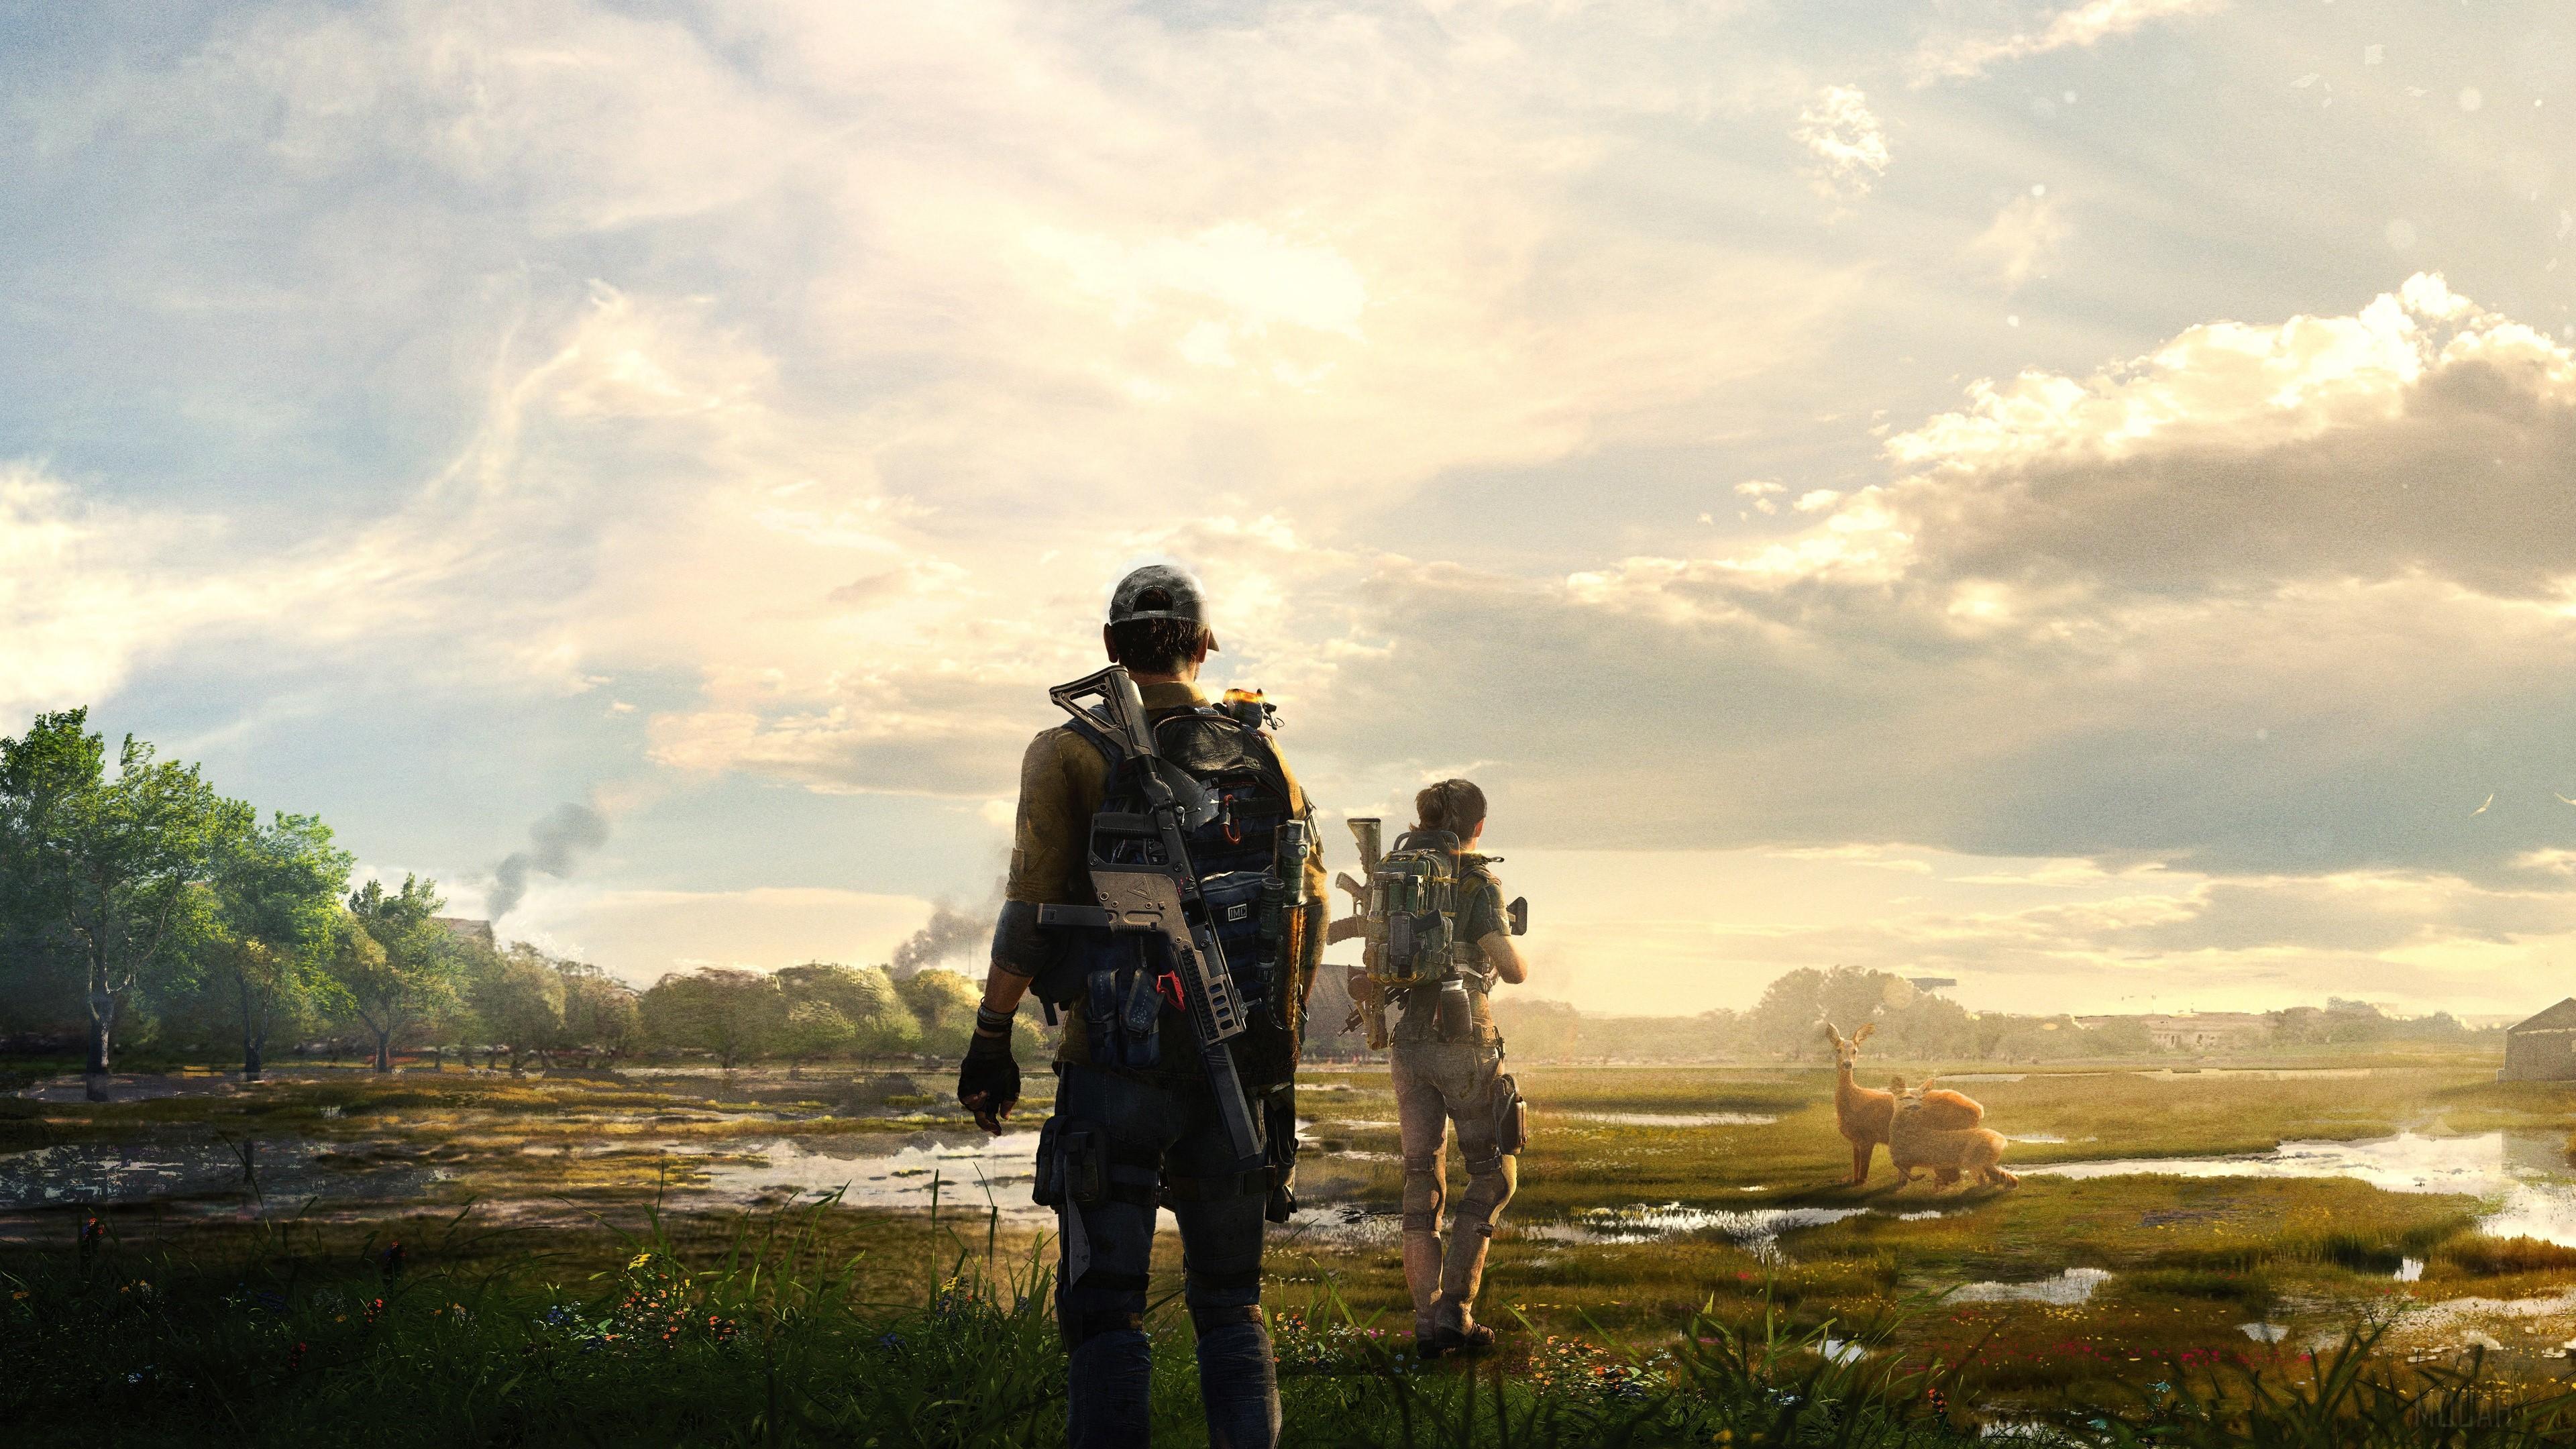 HD wallpaper, 2018 4K Tom Clancys The Division 2 4K